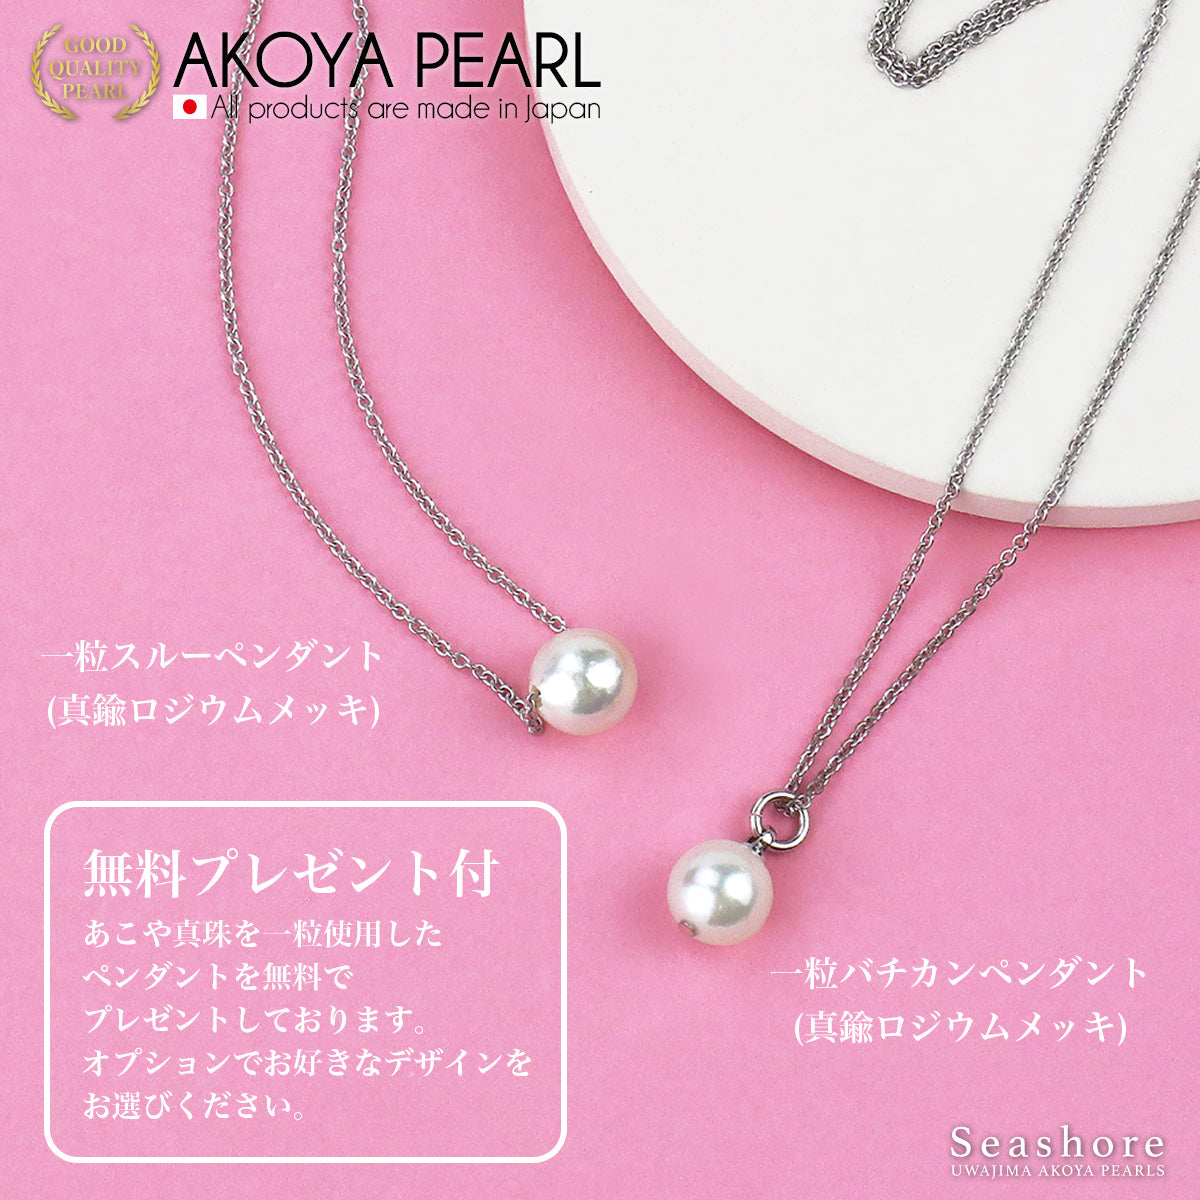 One Point Pearl Bracelet with Rondelle Transparent Reinforced Rubber White 6.5-7.0mm Akoya Pearl (4054)